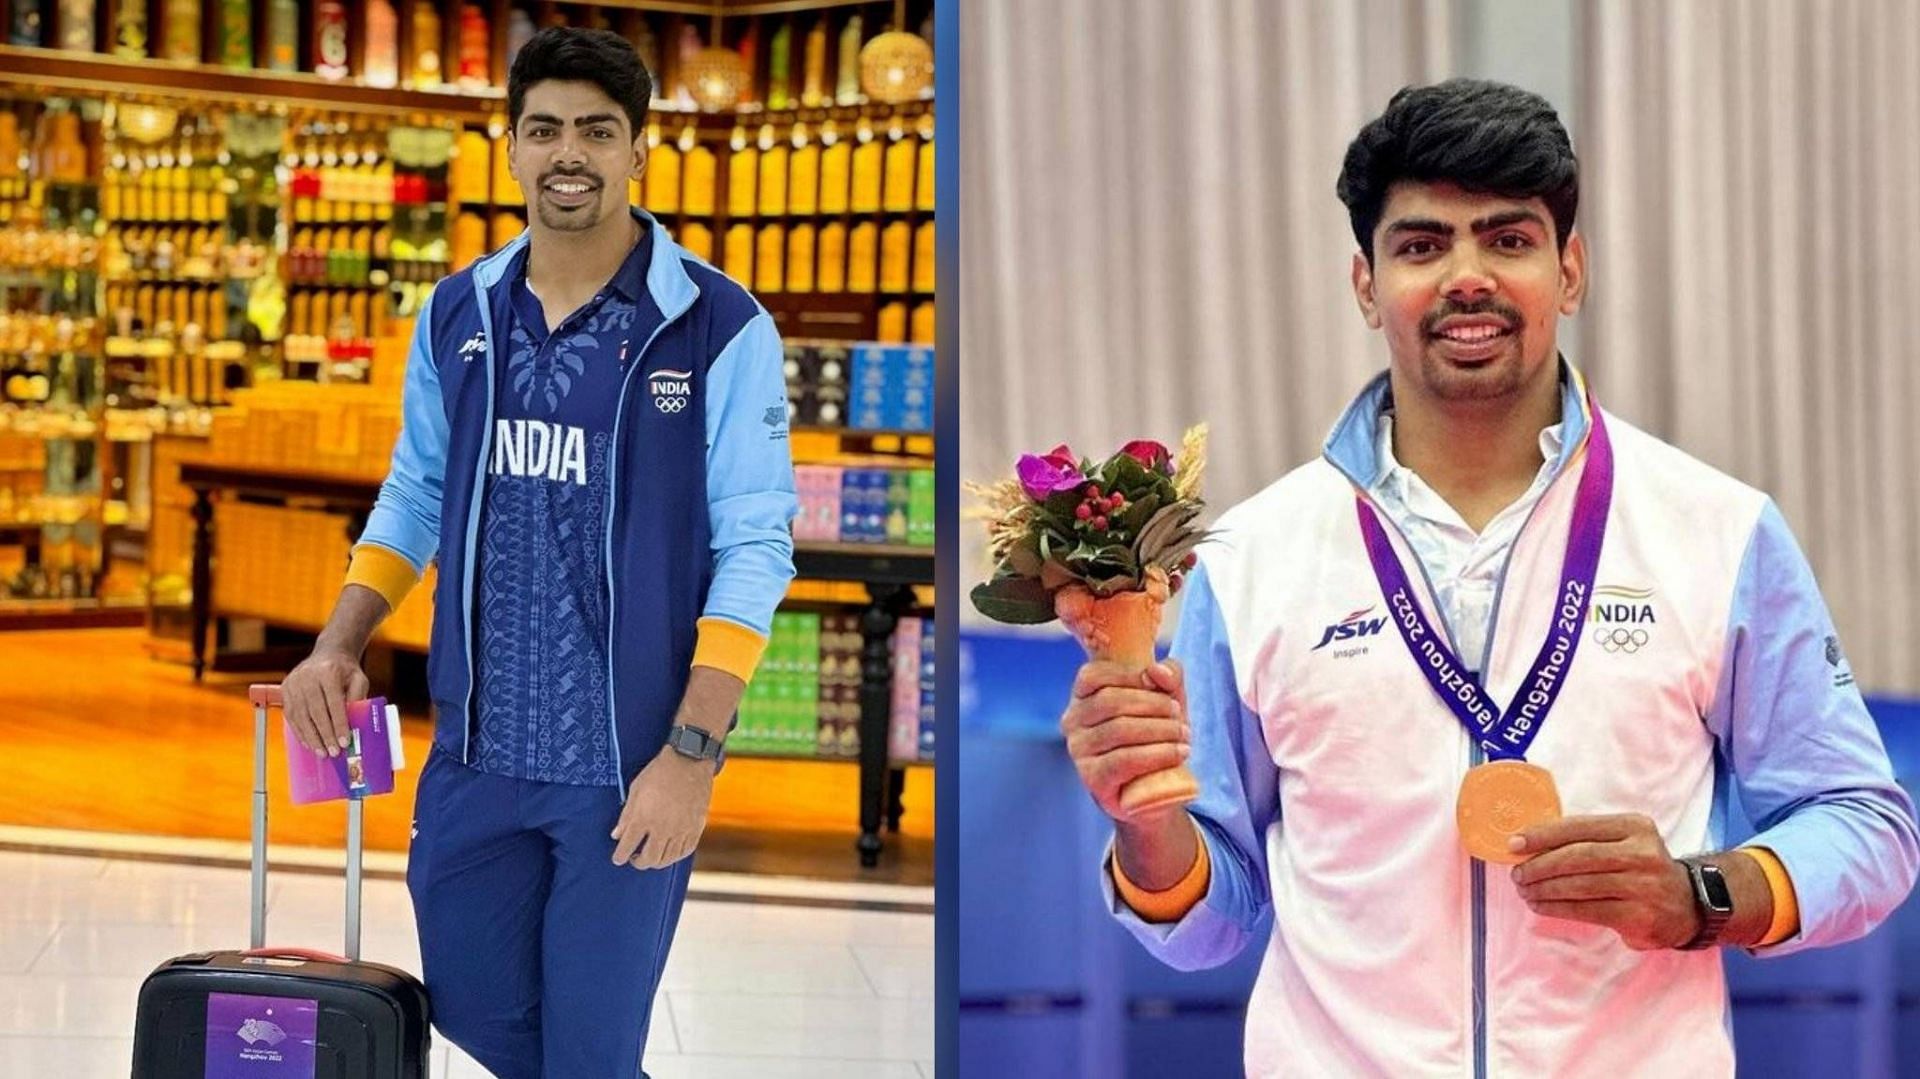 Pawan Sehrawat is likely to be the most expensive player (Image: Instagram)